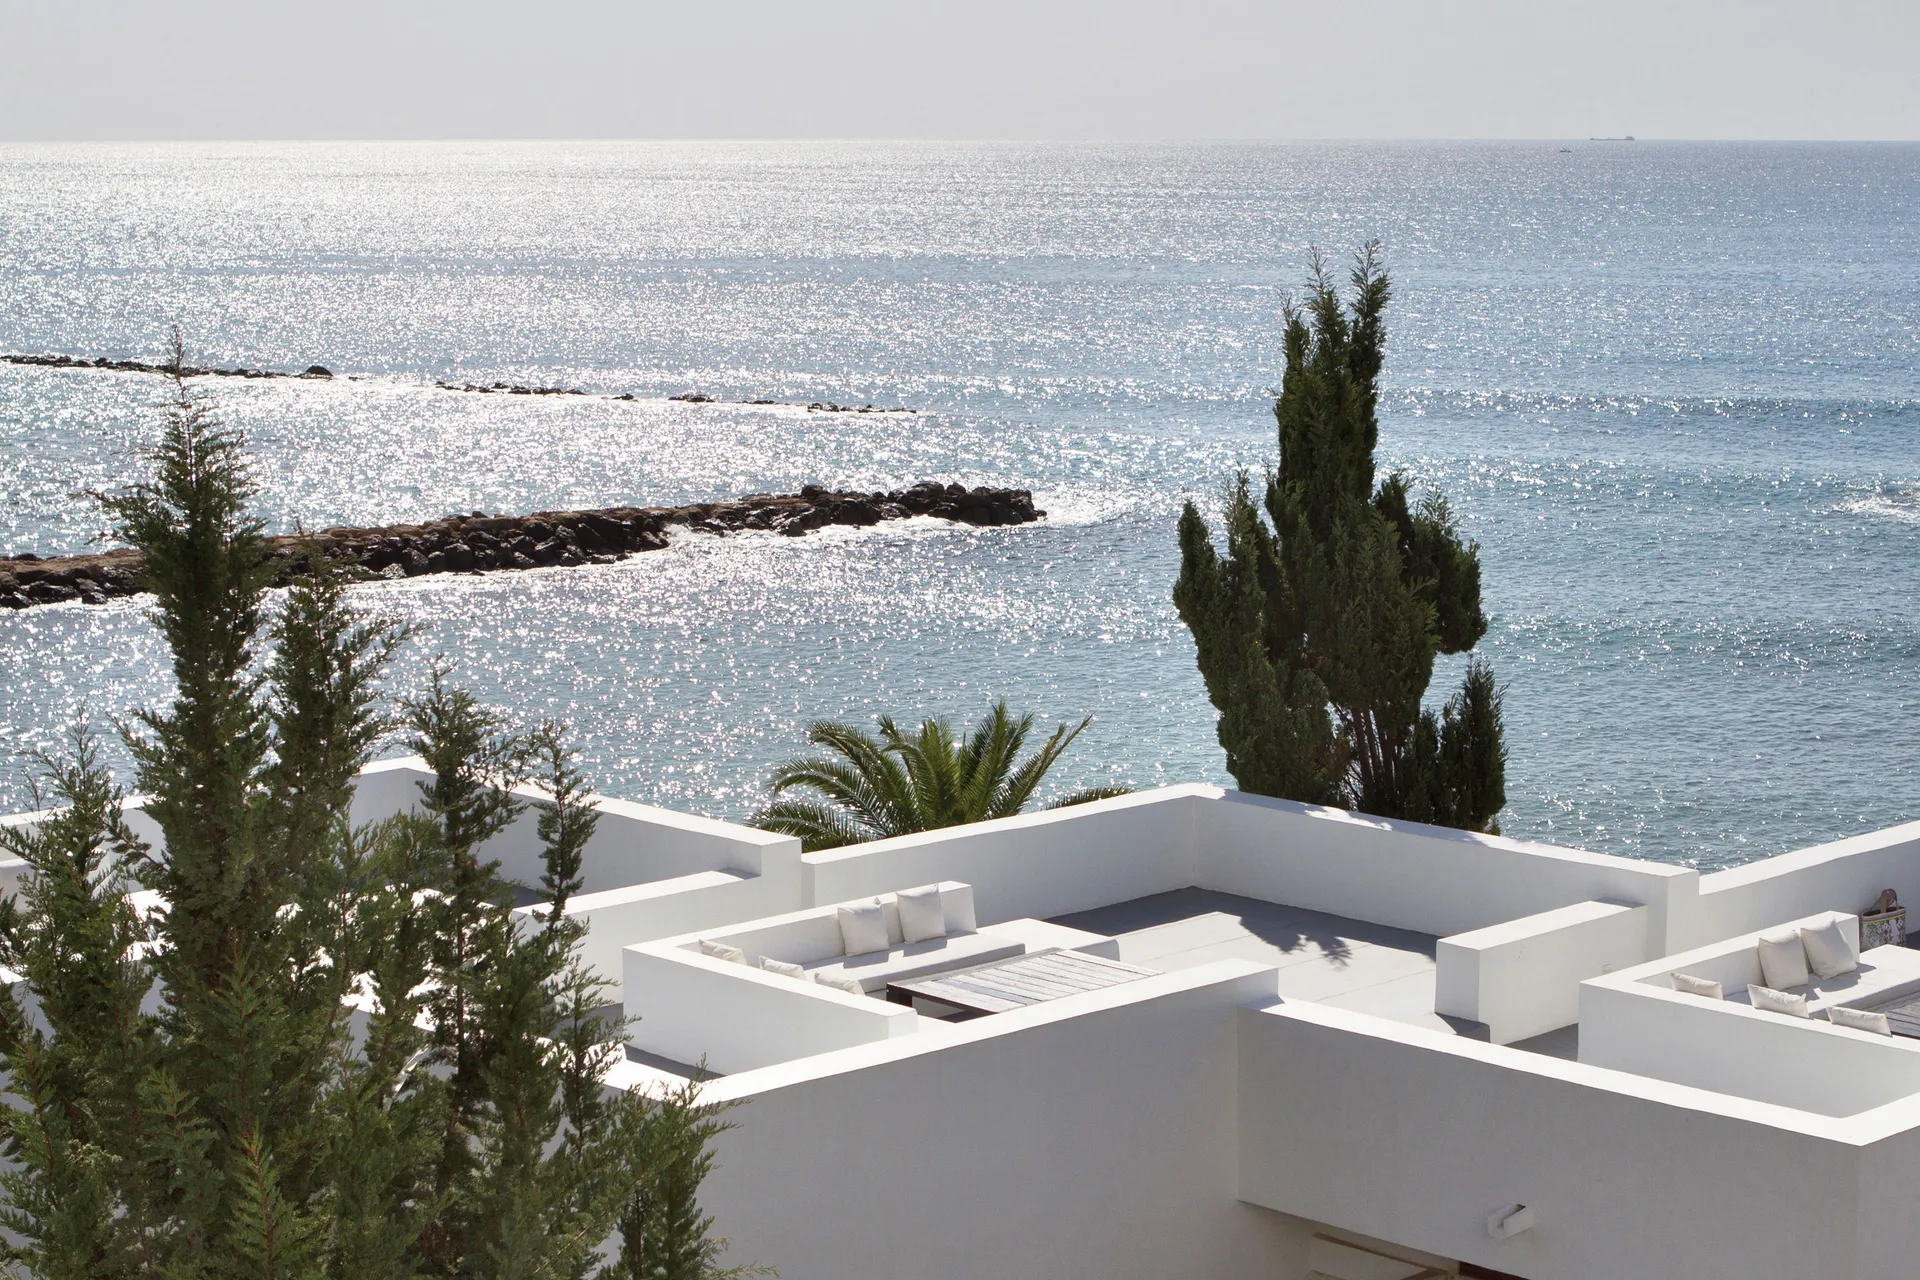 Top 8 unforgettable hotels in Cyprus